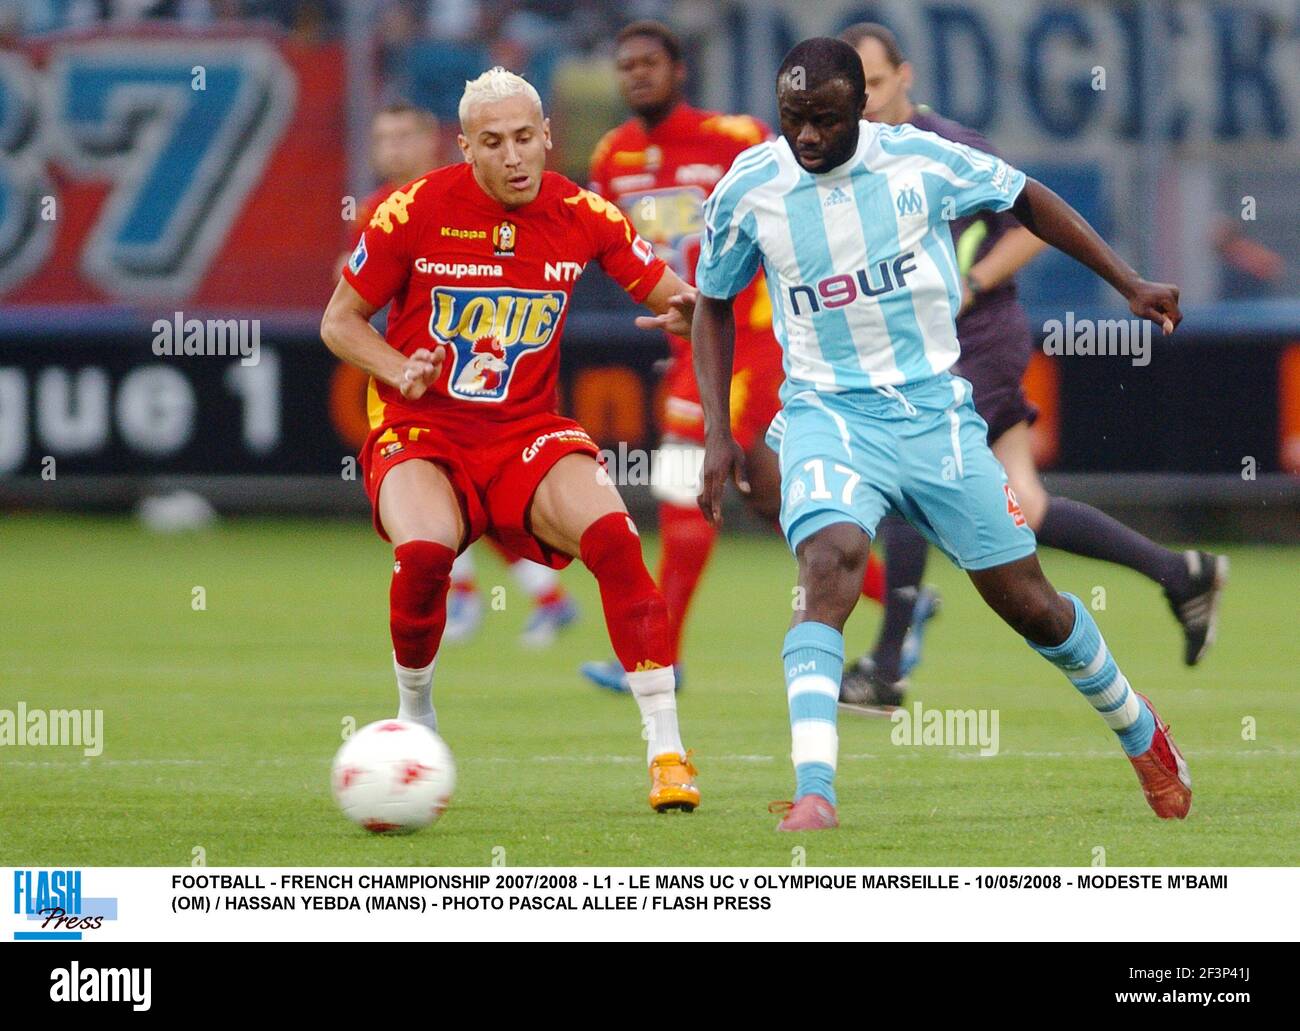 FOOTBALL - FRENCH CHAMPIONSHIP 2007/2008 - L1 - LE MANS UC v OLYMPIQUE MARSEILLE - 10/05/2008 - MODESTE M'BAMI (OM) / HASSAN YEBDA (MANS) - PHOTO PASCAL ALLEE / FLASH PRESS Stock Photo